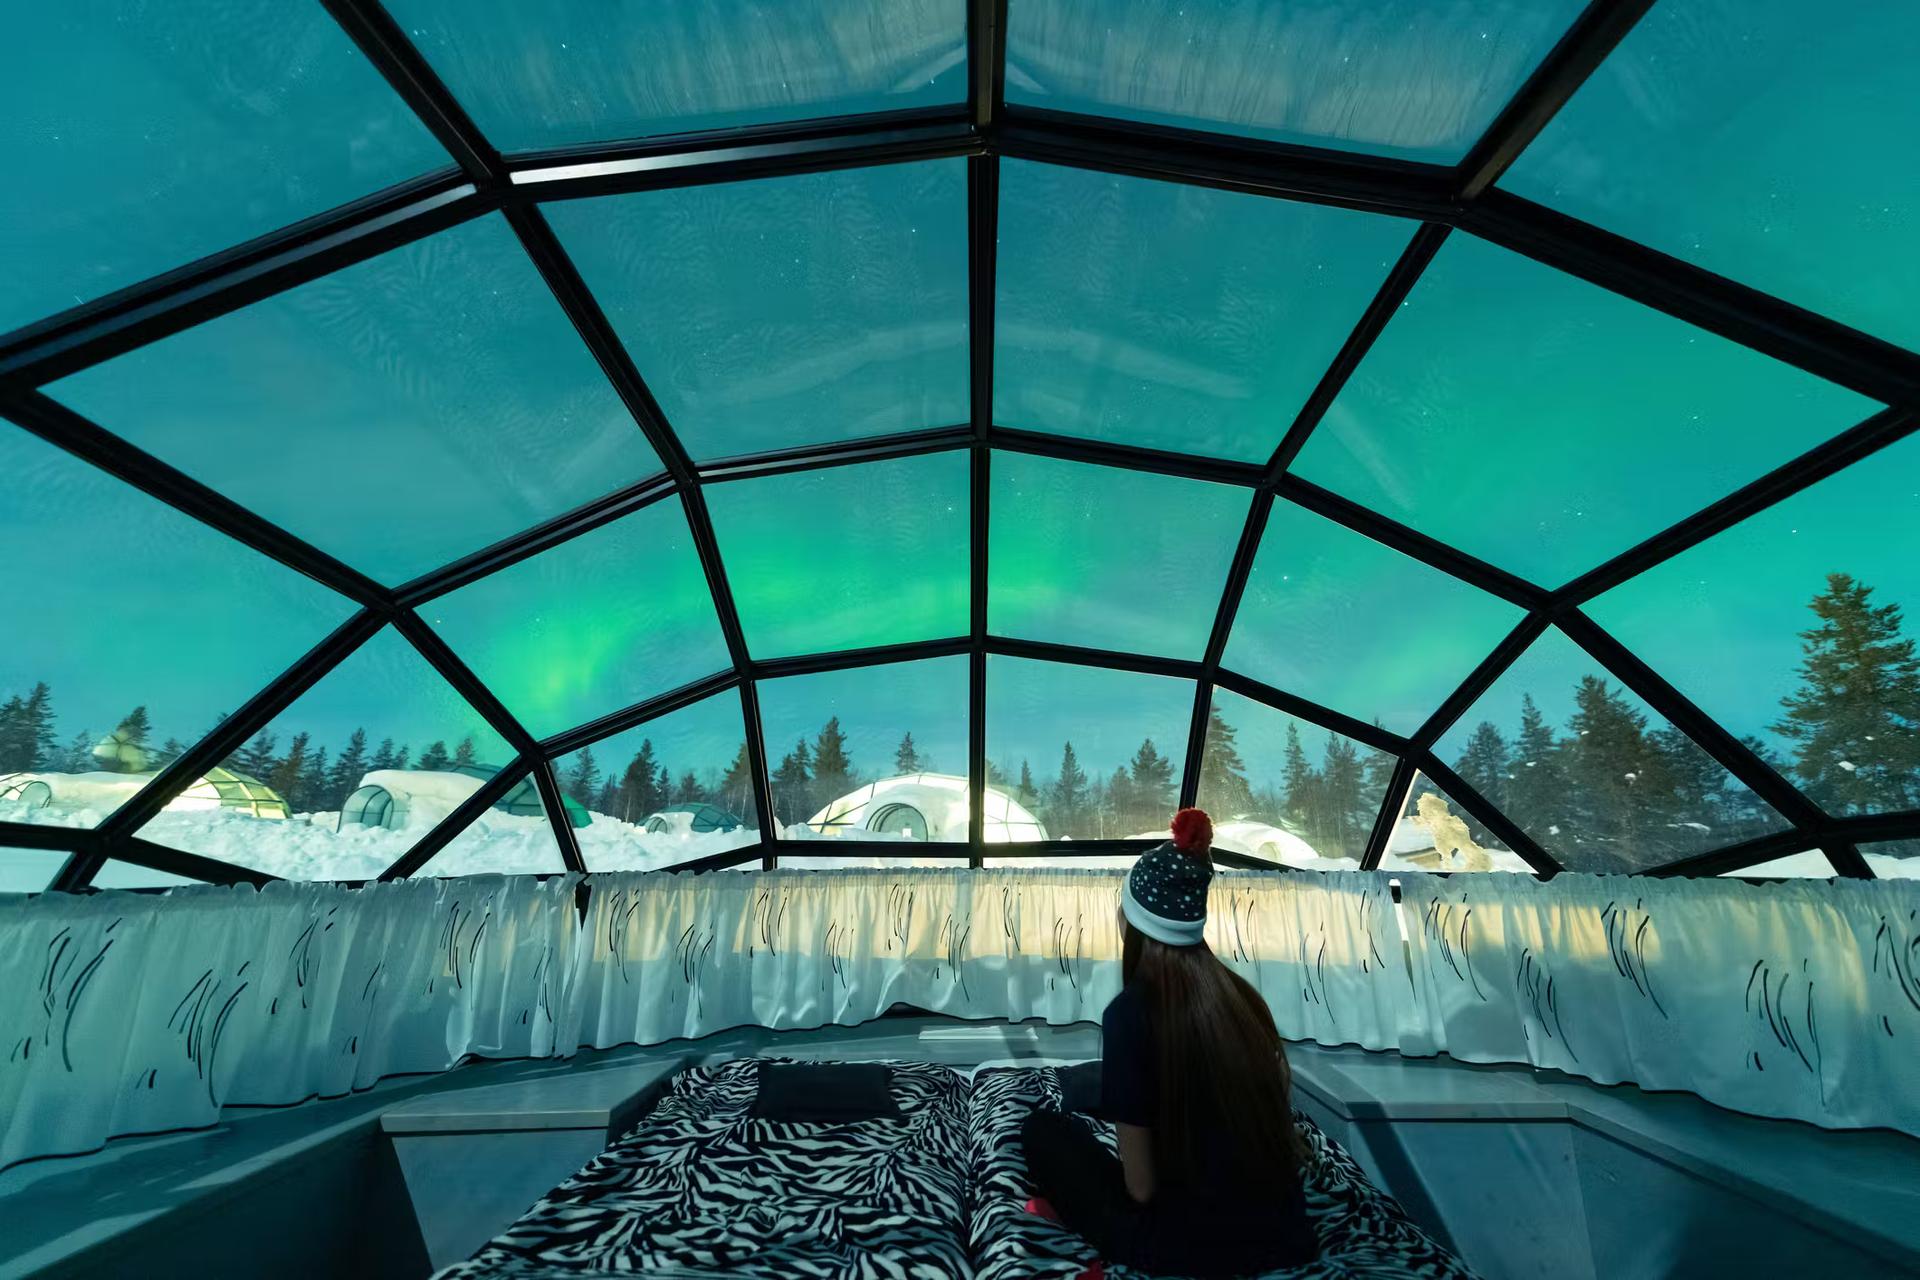 Aurora borealis shining in the night sky seen from Glass Igloos.